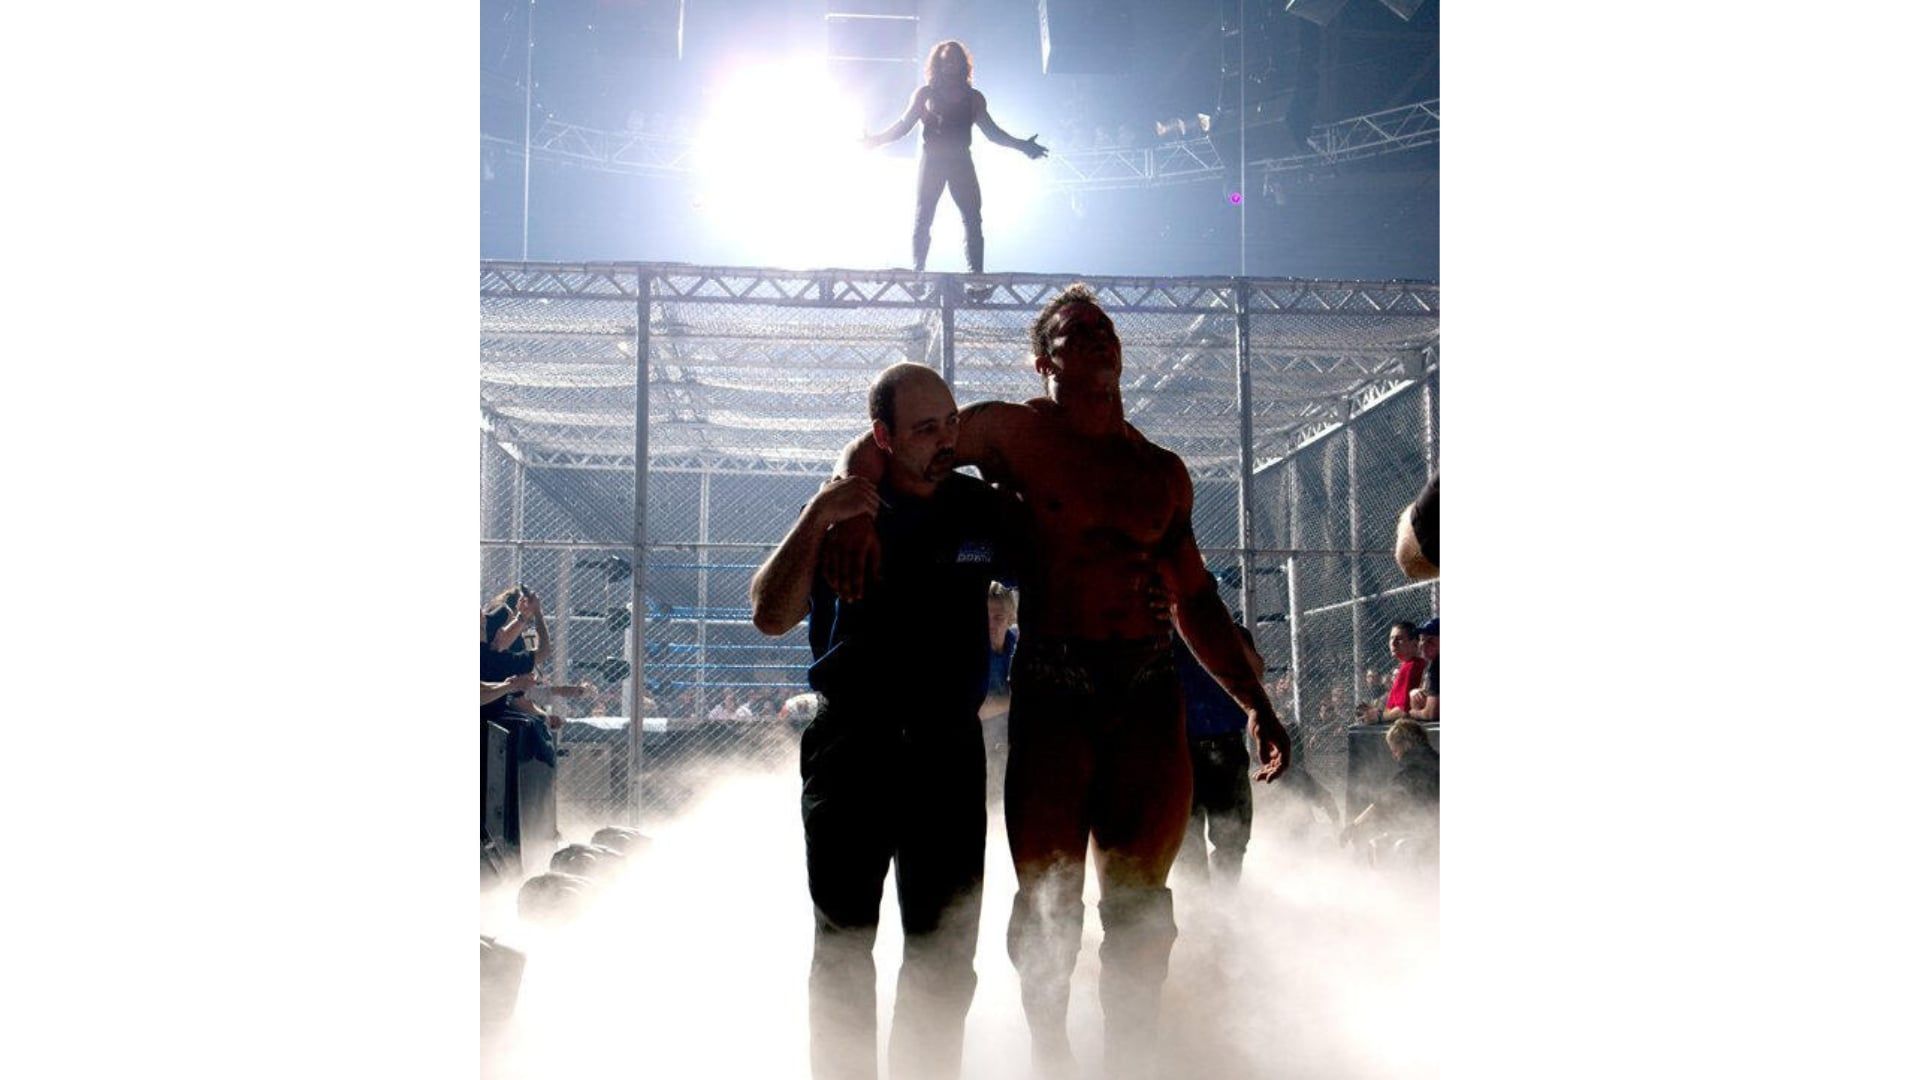 Randy Orton failed to defeat The Undertaker in a Hell in a Cell Match at Armageddon 2005